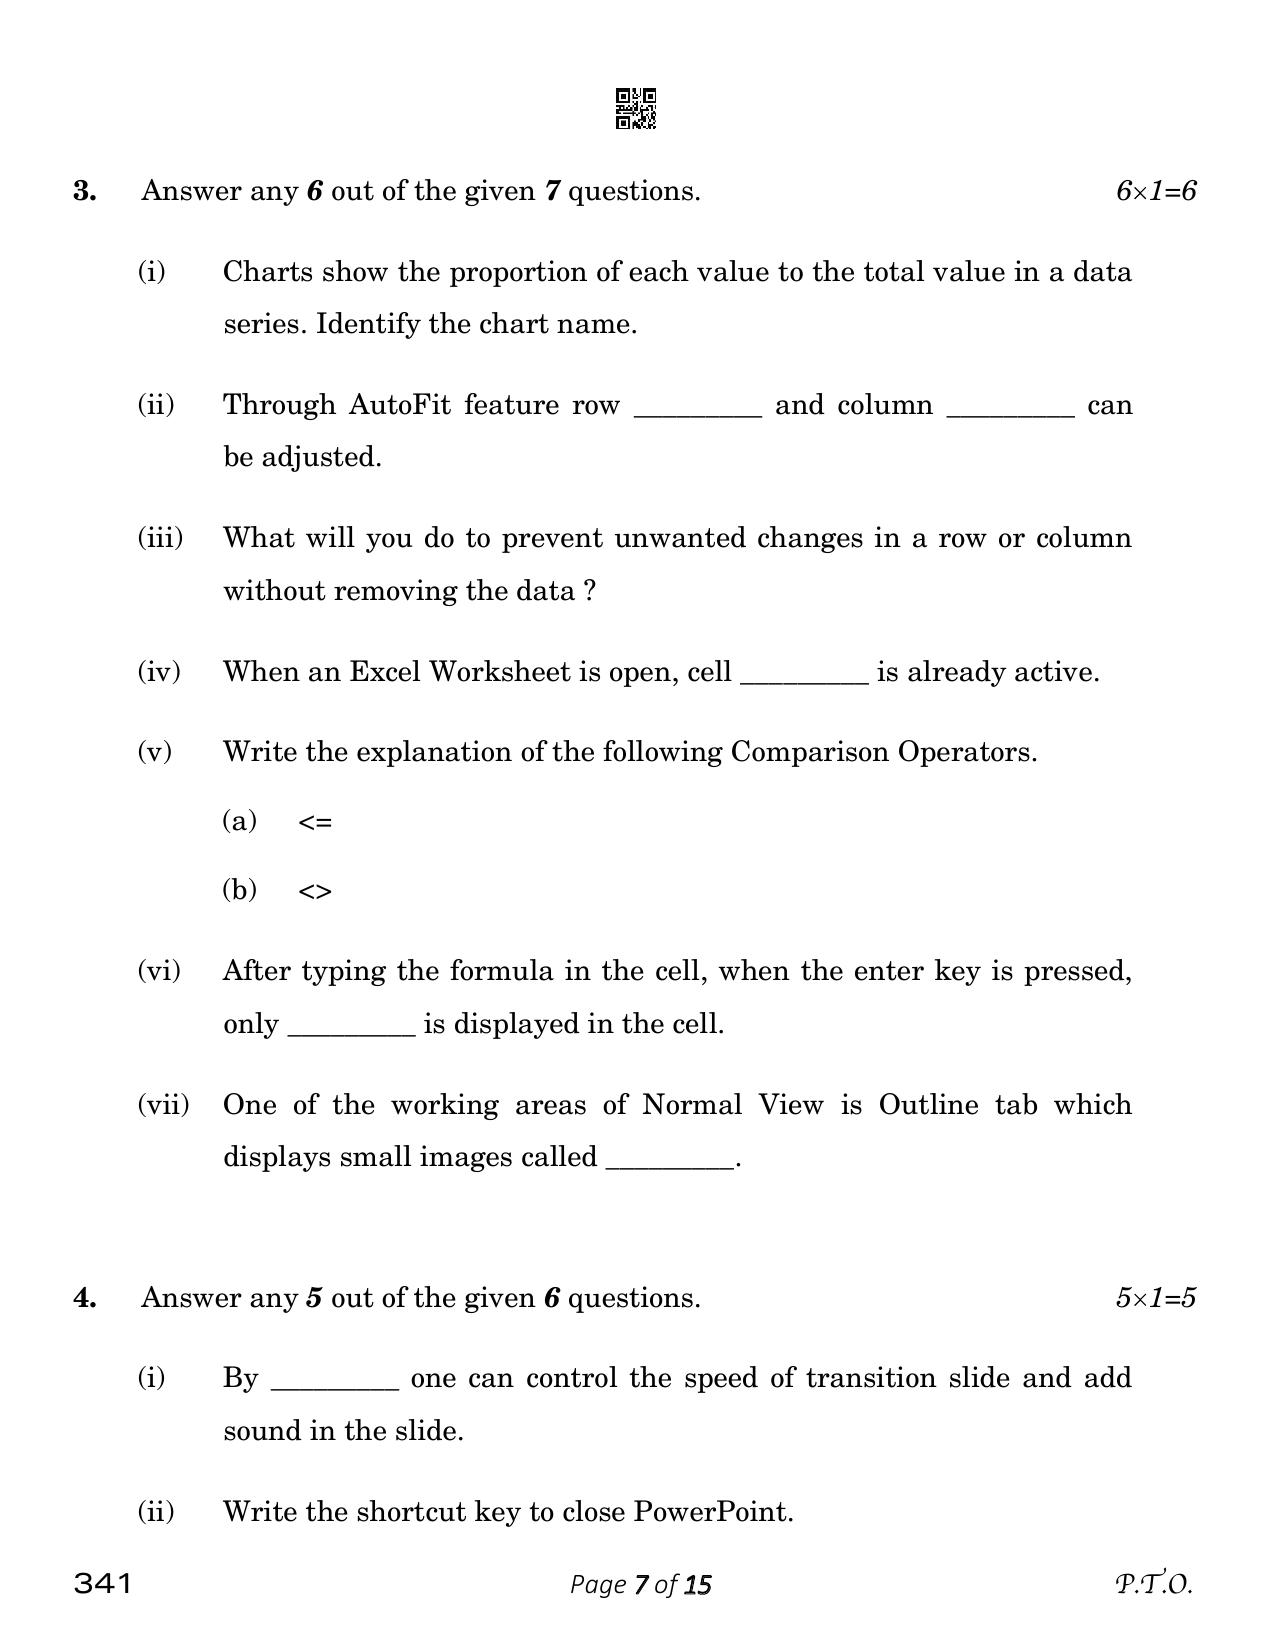 CBSE Class 12 Typography & Computer Applications (Compartment) 2023 Question Paper - Page 7